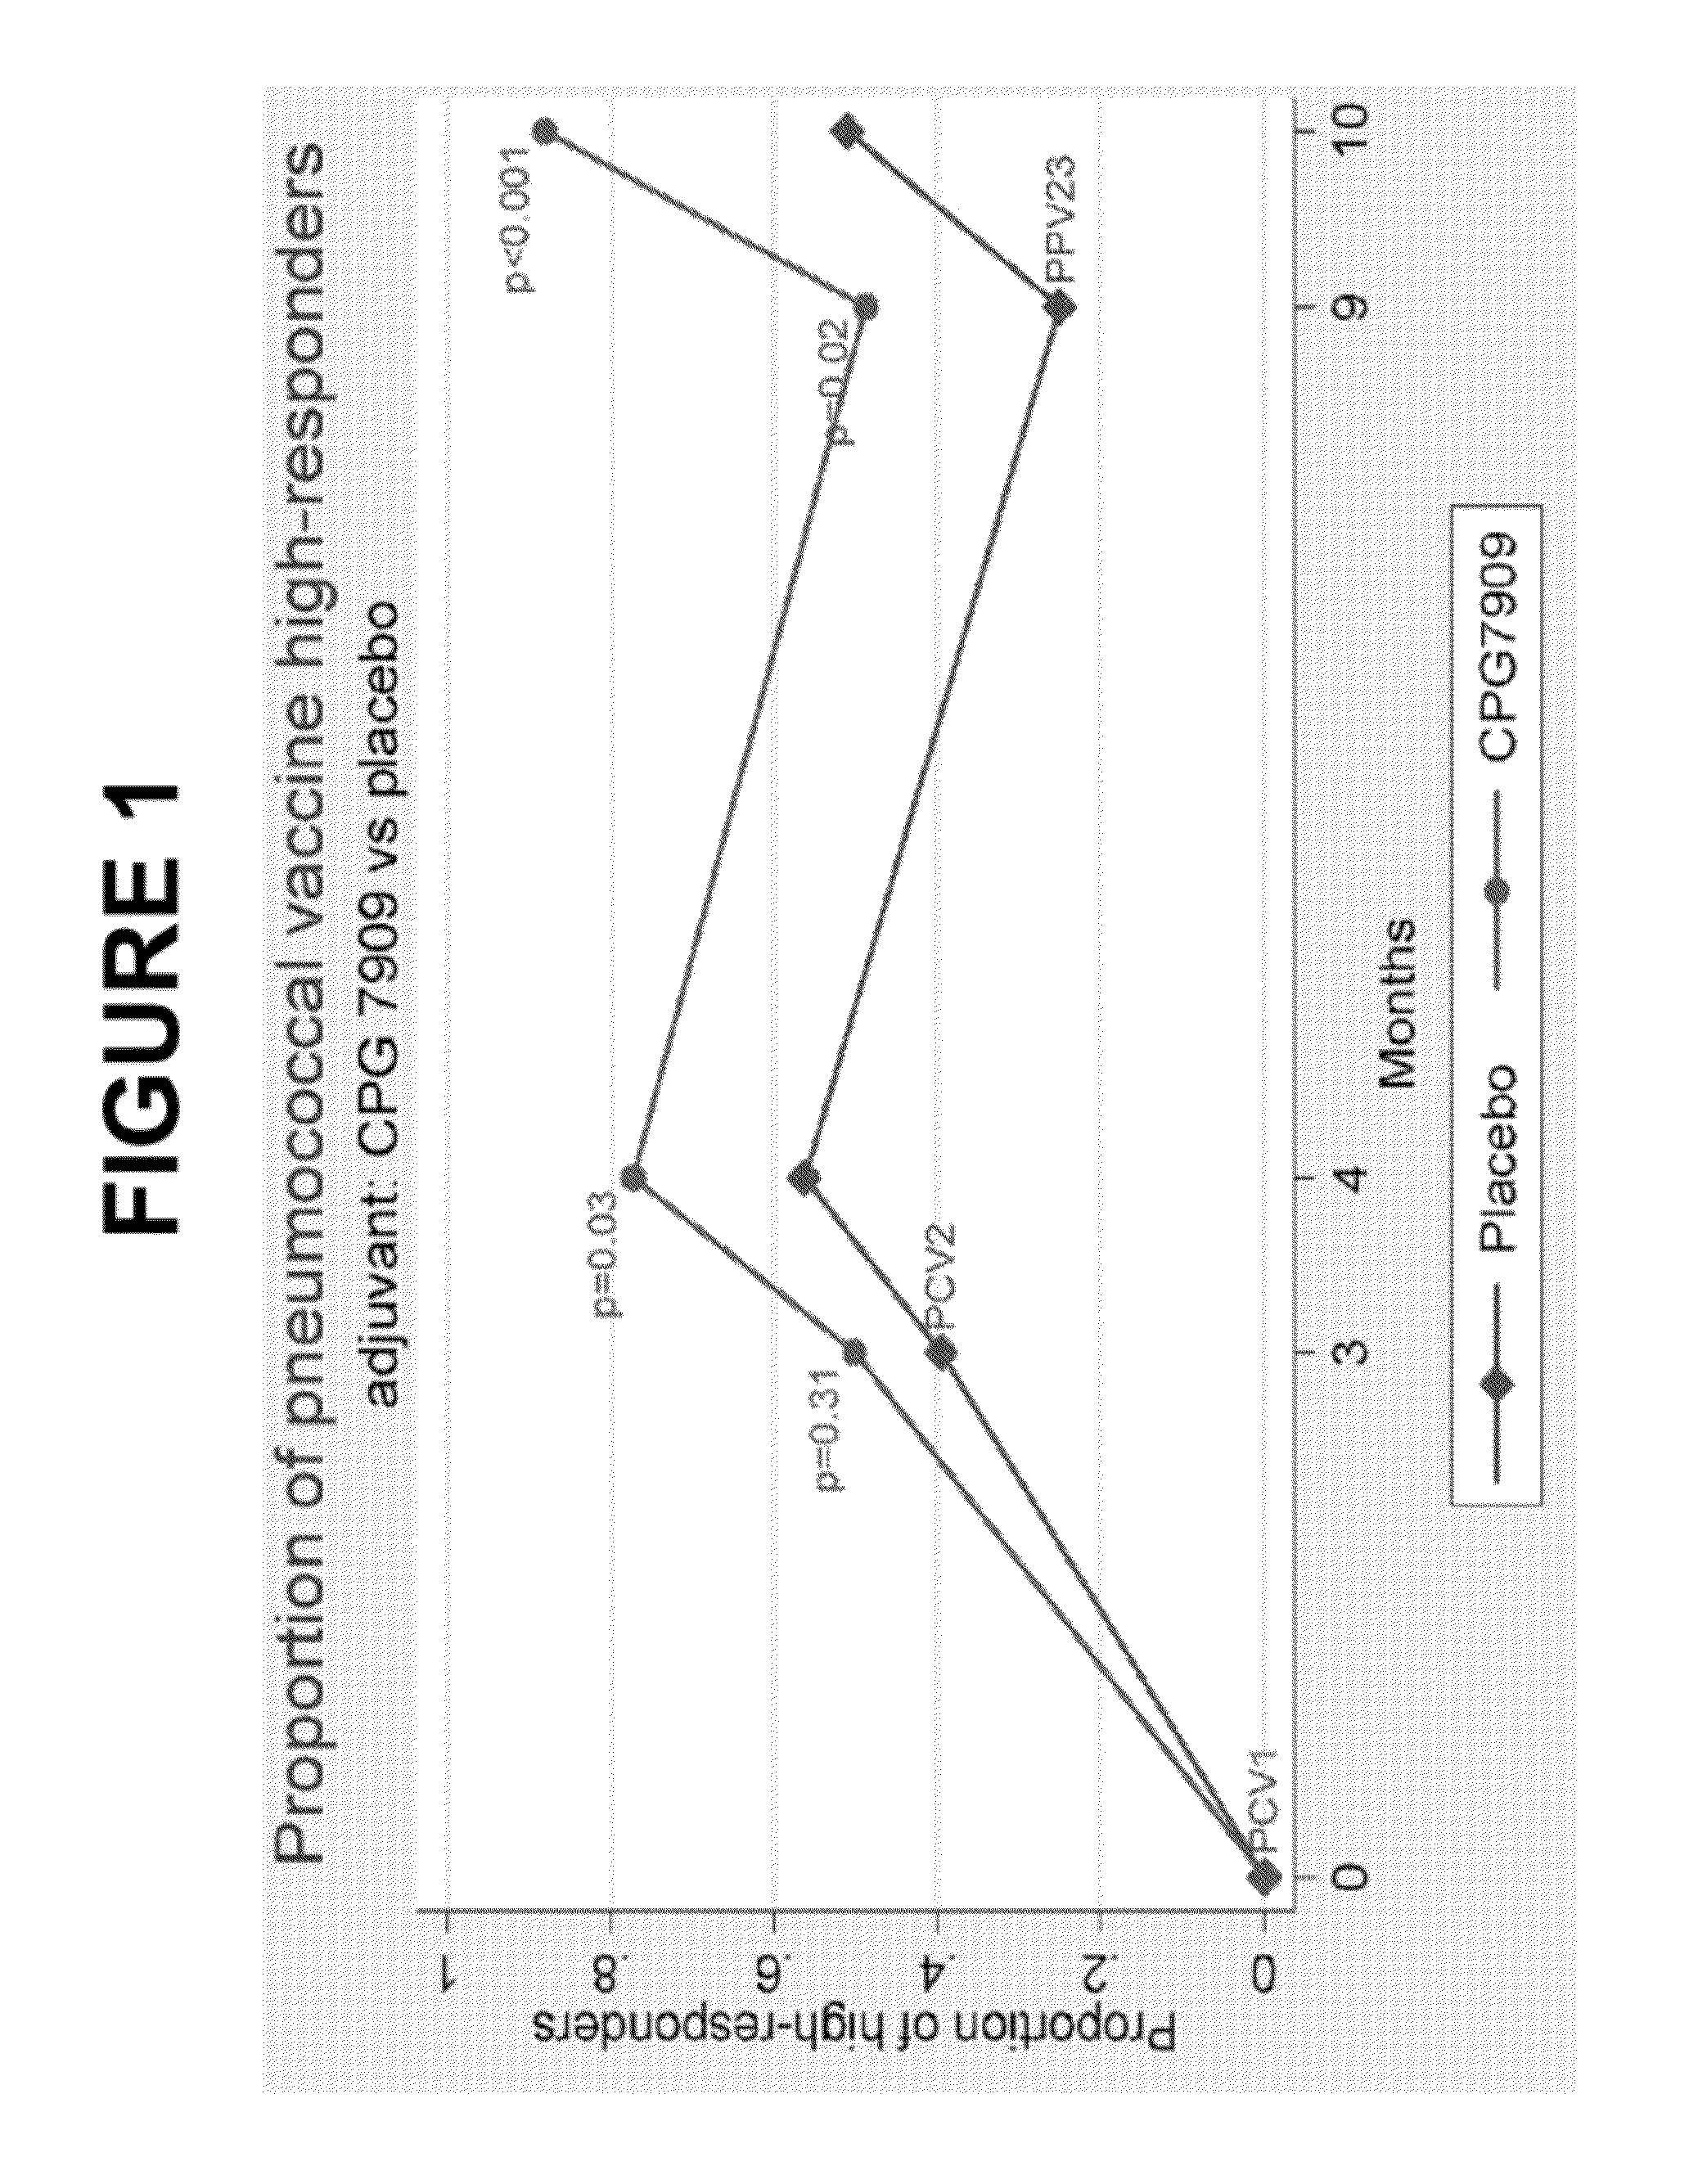 Pneumococcal vaccine and uses thereof